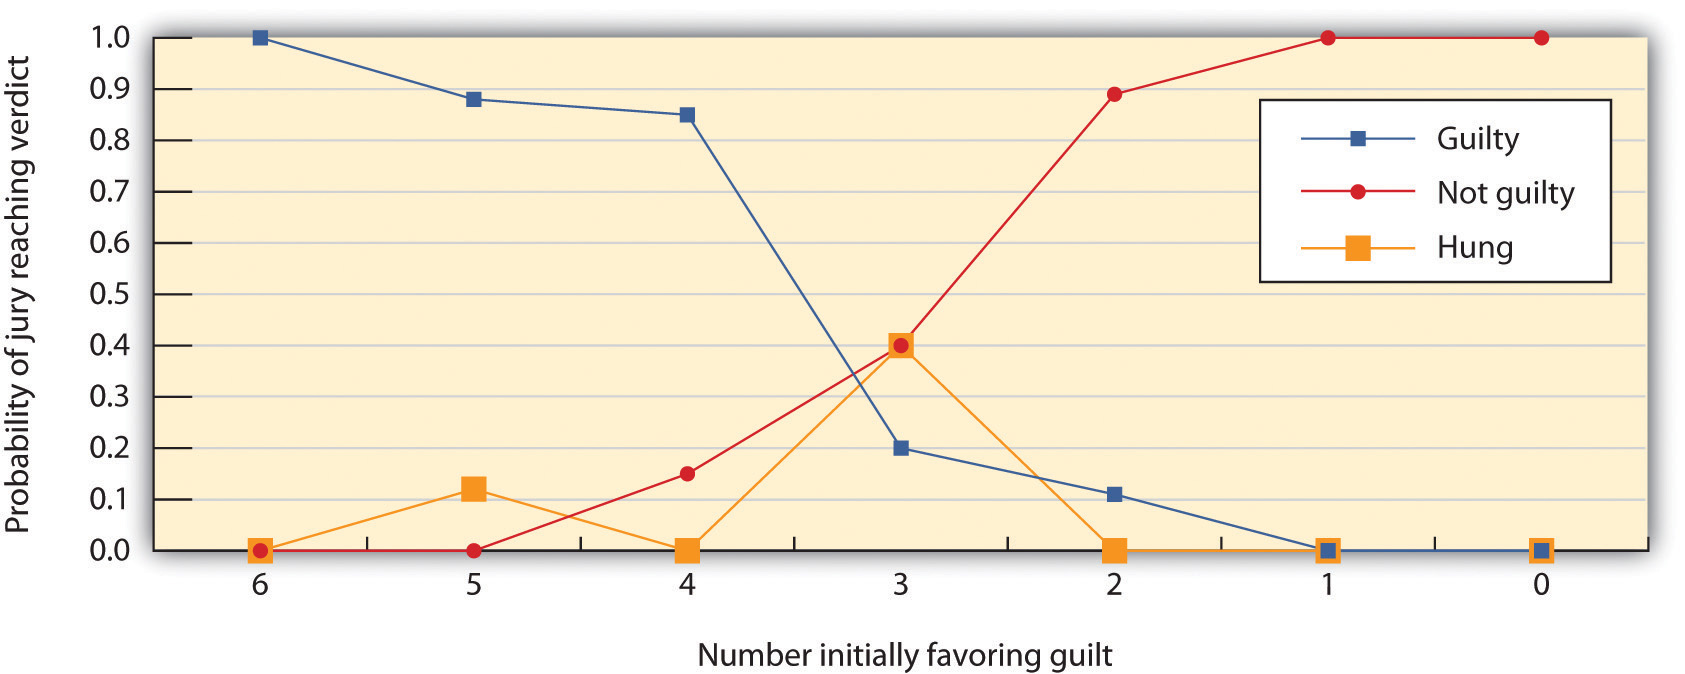 This graph contrasts the probability of jury reaching verdict by the number initially favouring guilt.